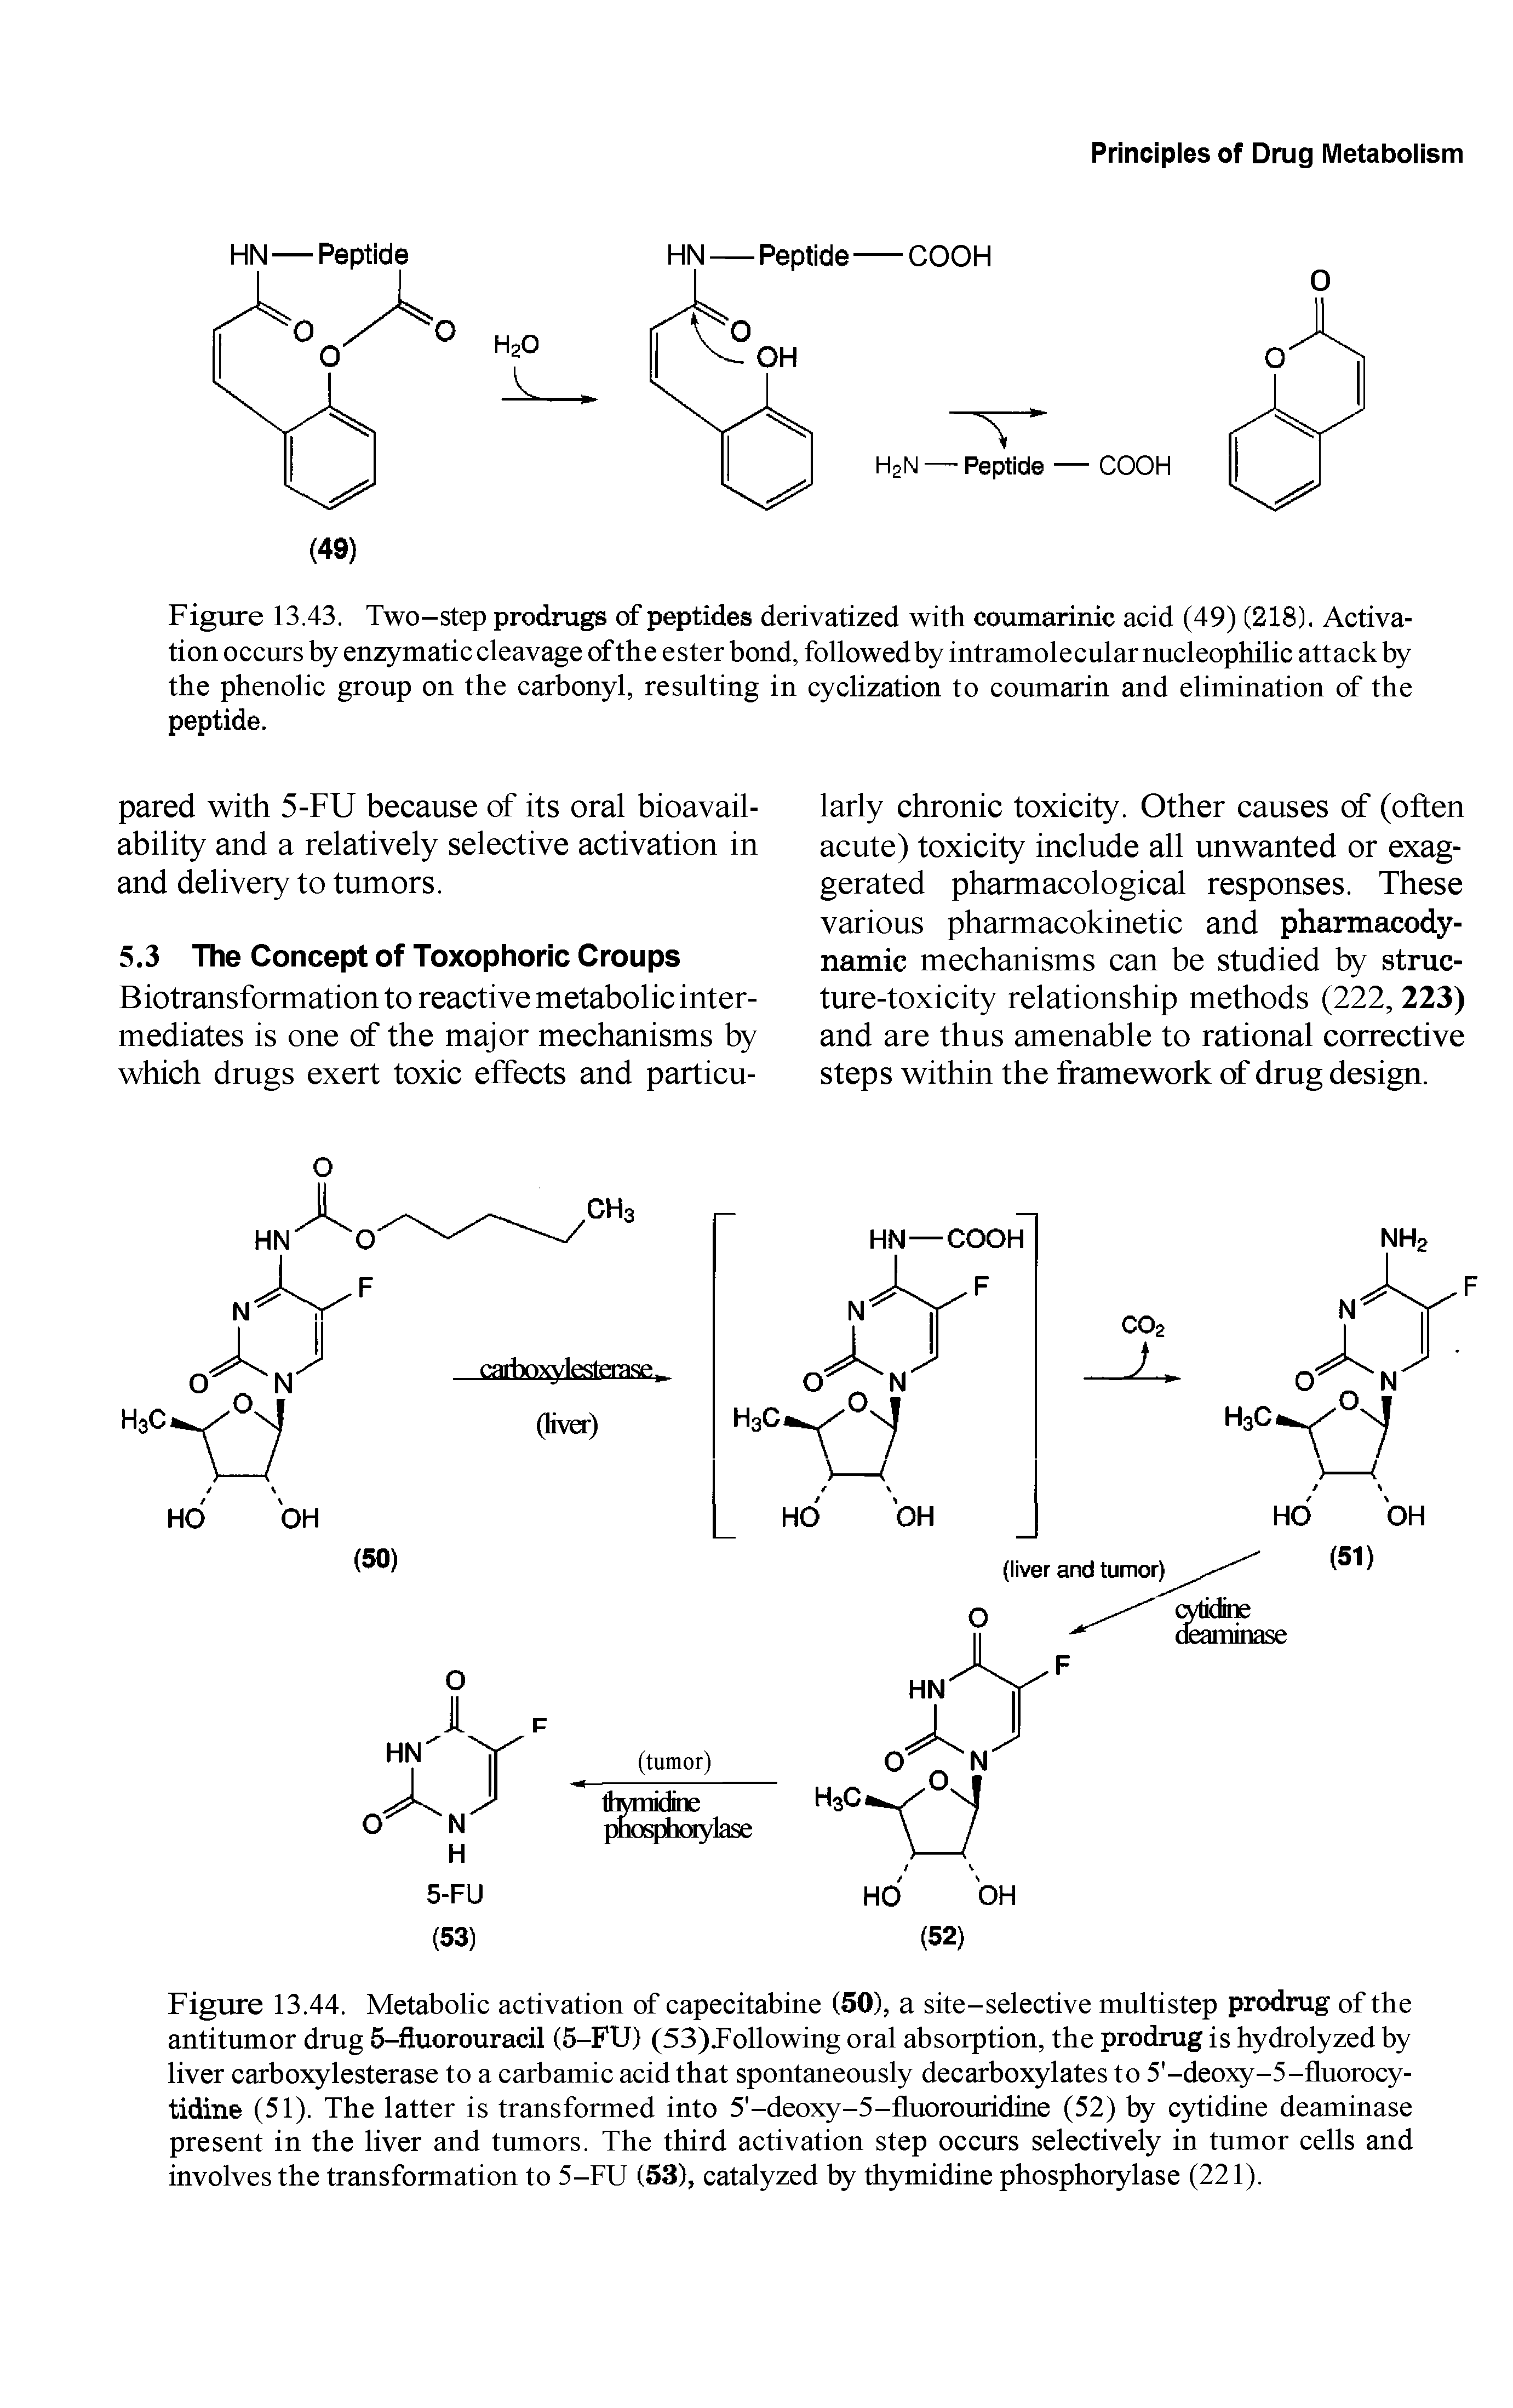 Figure 13.43. Two-step prodrugs of peptides derivatized with coumarinic acid (49) (218). Activation occurs by enzymatic cleavage of the ester bond, followed by intramolecular nucleophilic attack by the phenolic group on the carbonyl, resulting in cyclization to coumarin and elimination of the peptide.